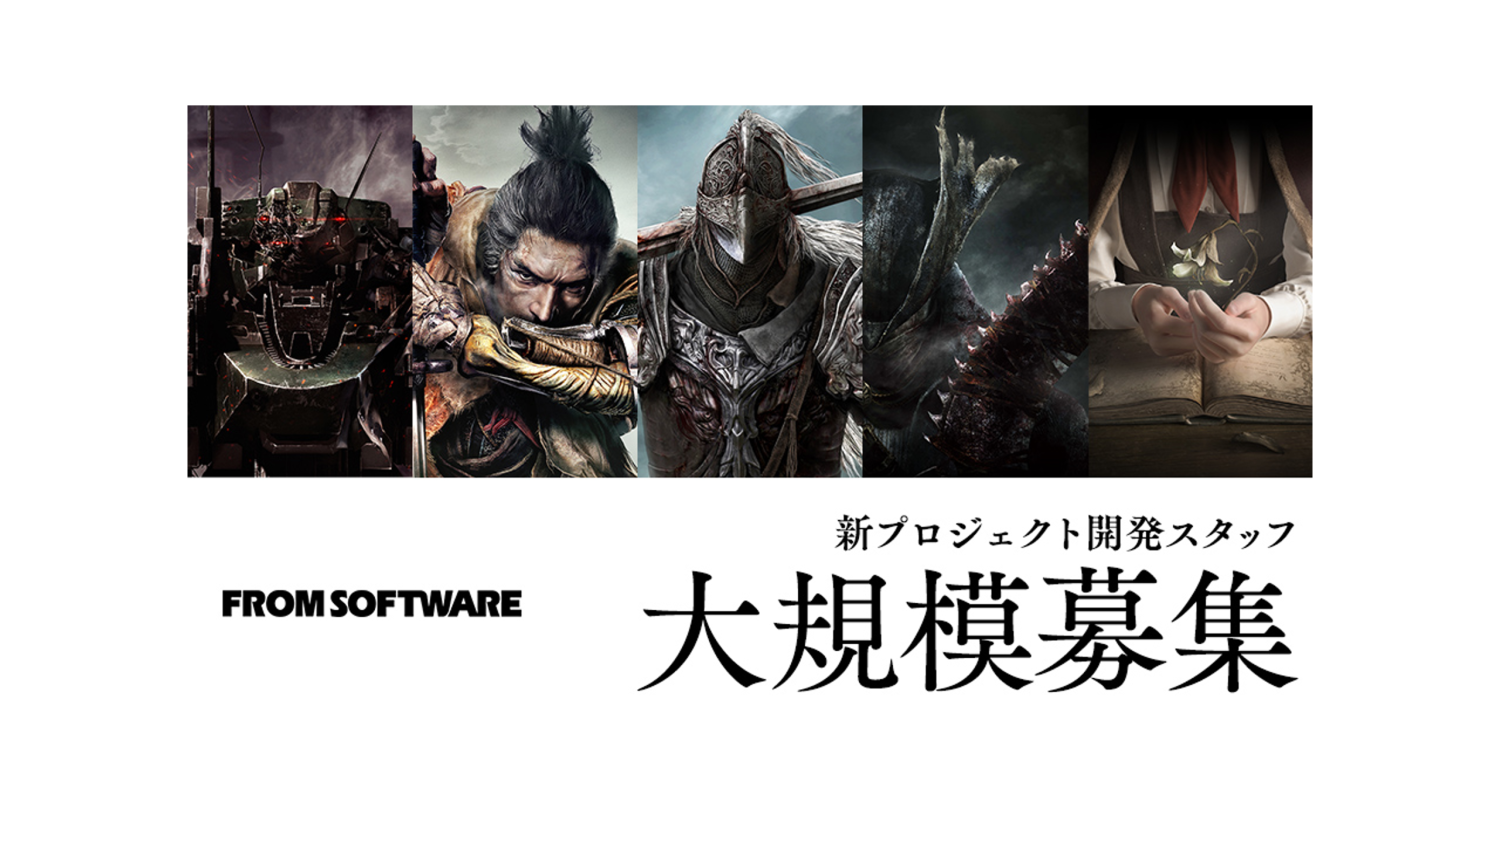 Just port the game Sony, the demand is clearly there. : r/fromsoftware